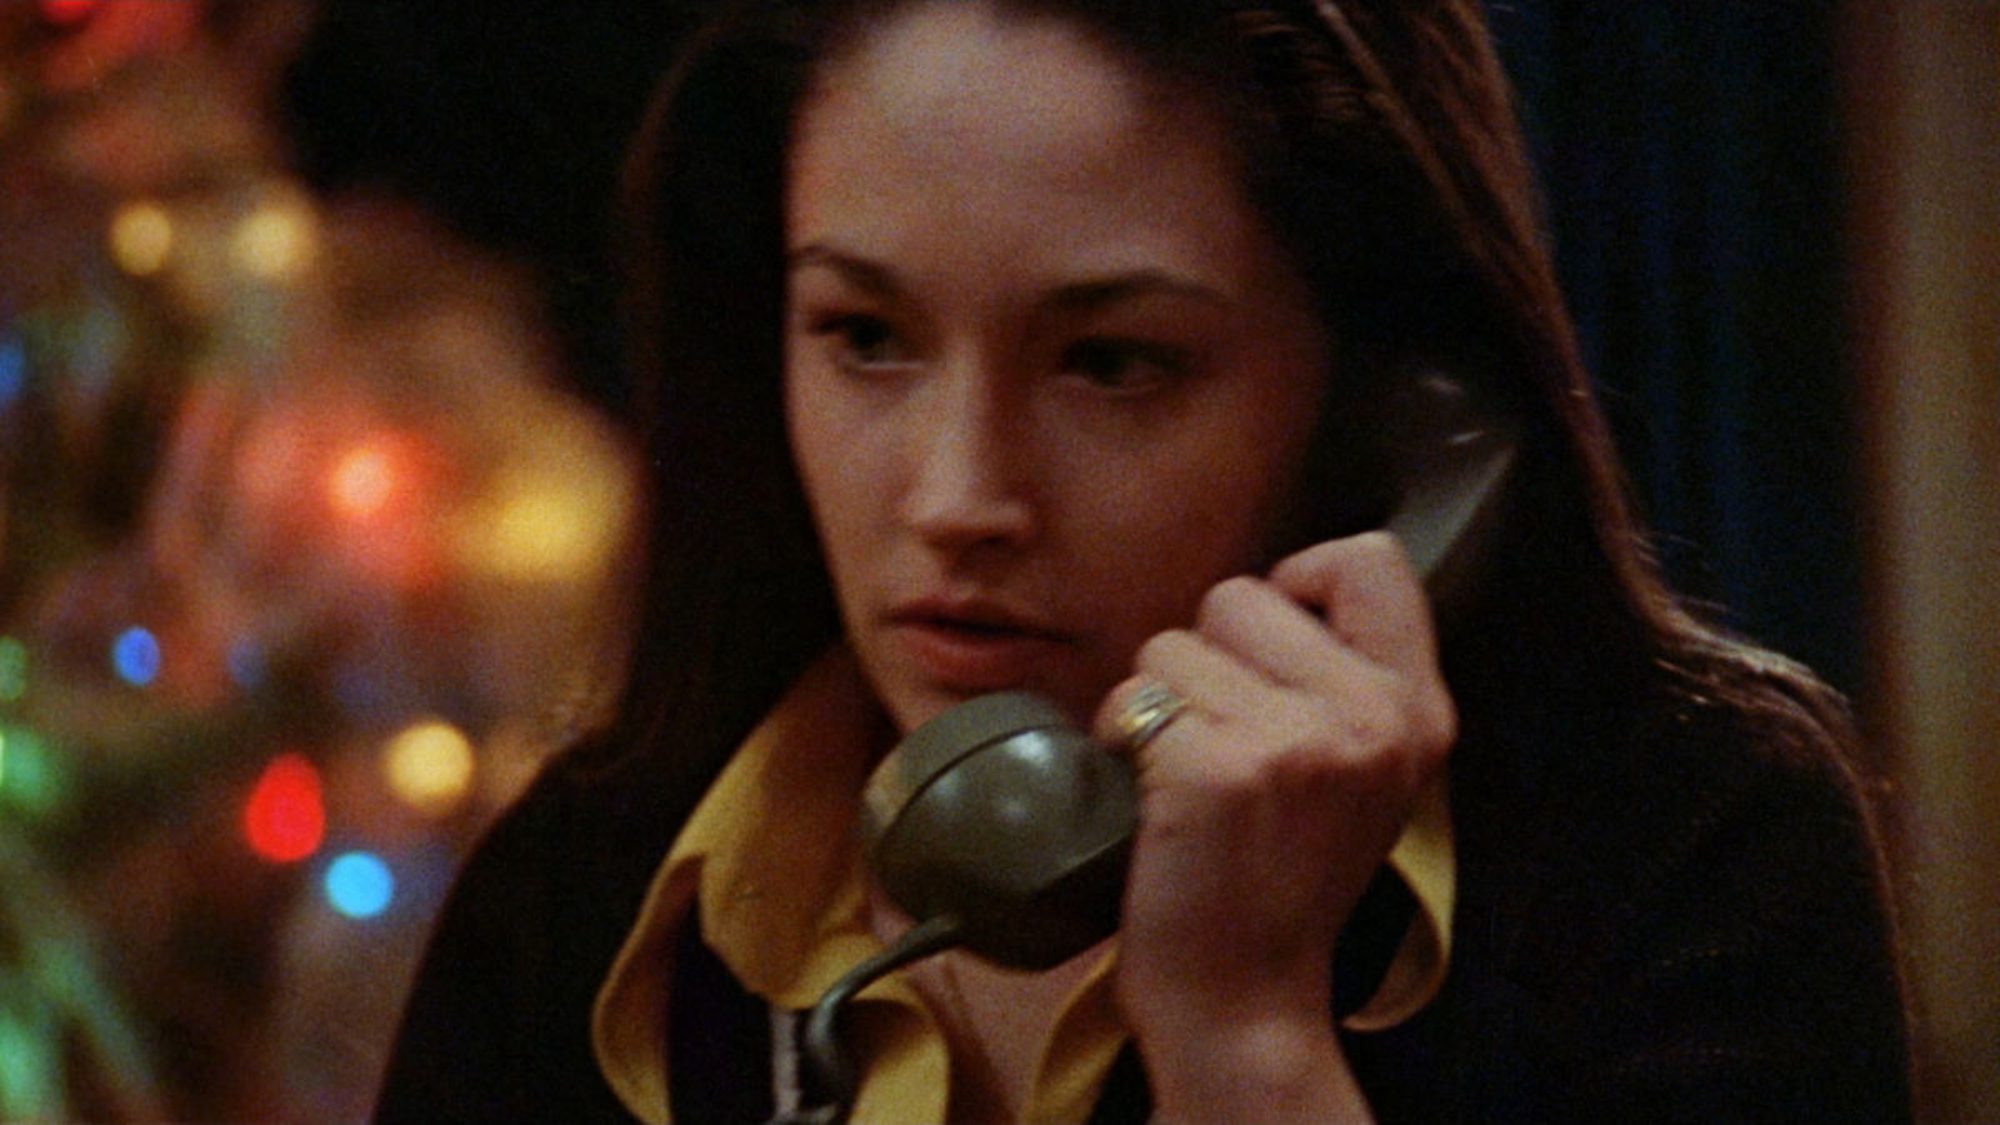 Whodunit movies 'Black Christmas' Olivia Hussey as Jess holding a phone with Christmas lights on in the background.